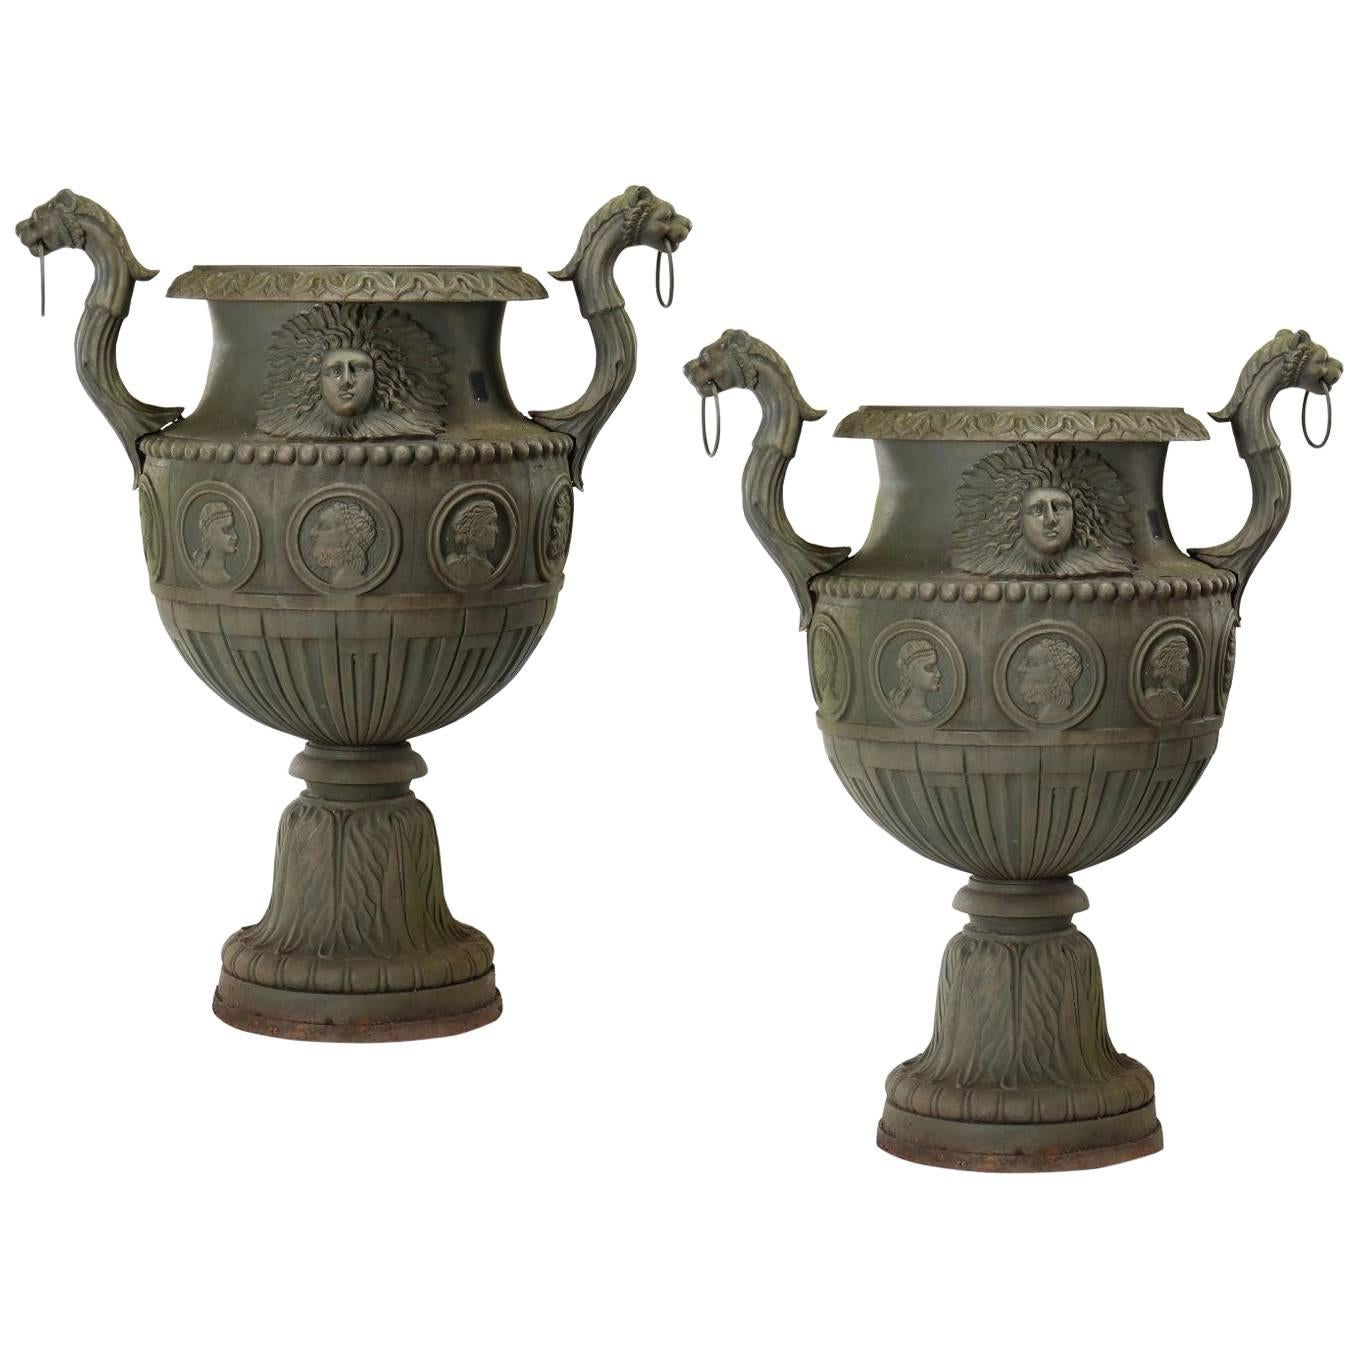 Pair of Monumental Neoclassical Style Cast Iron Urns For Sale